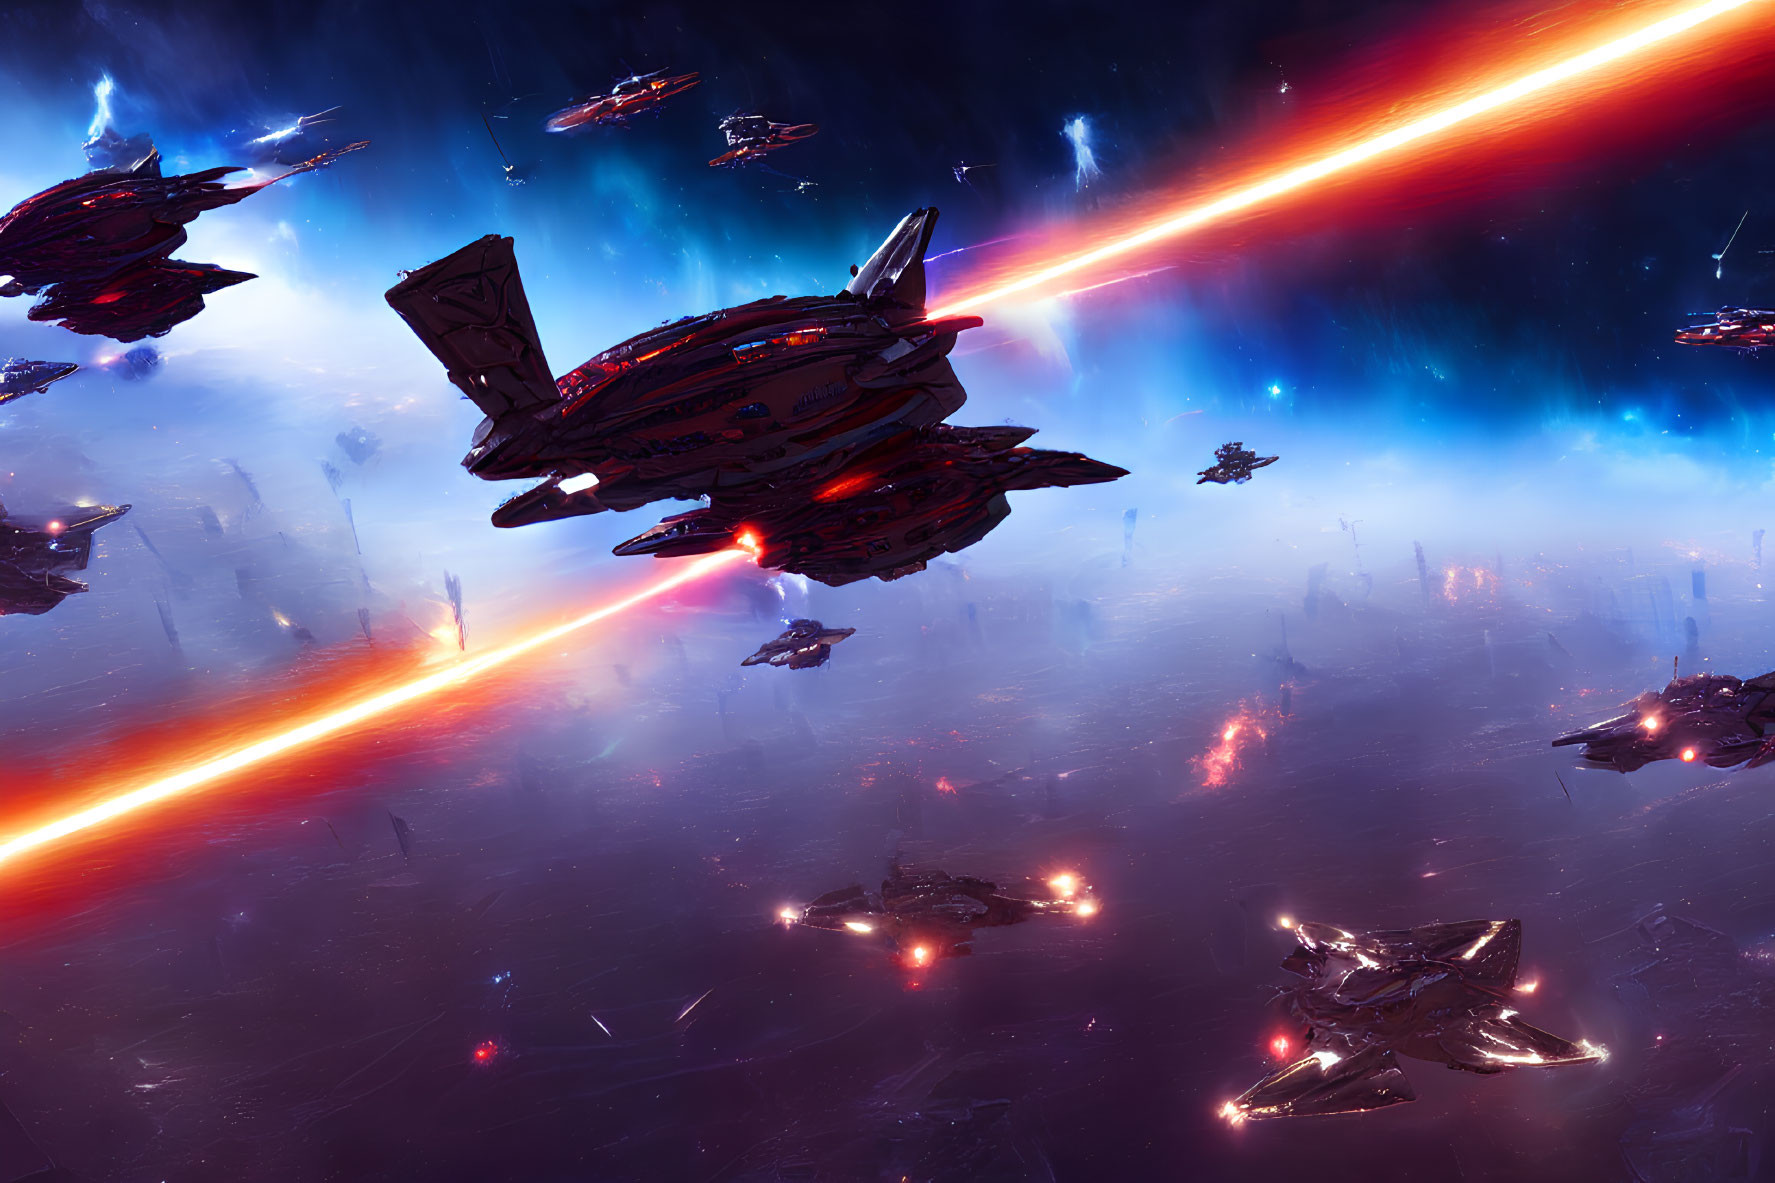 Futuristic sci-fi space battle with laser fire in starry cosmos